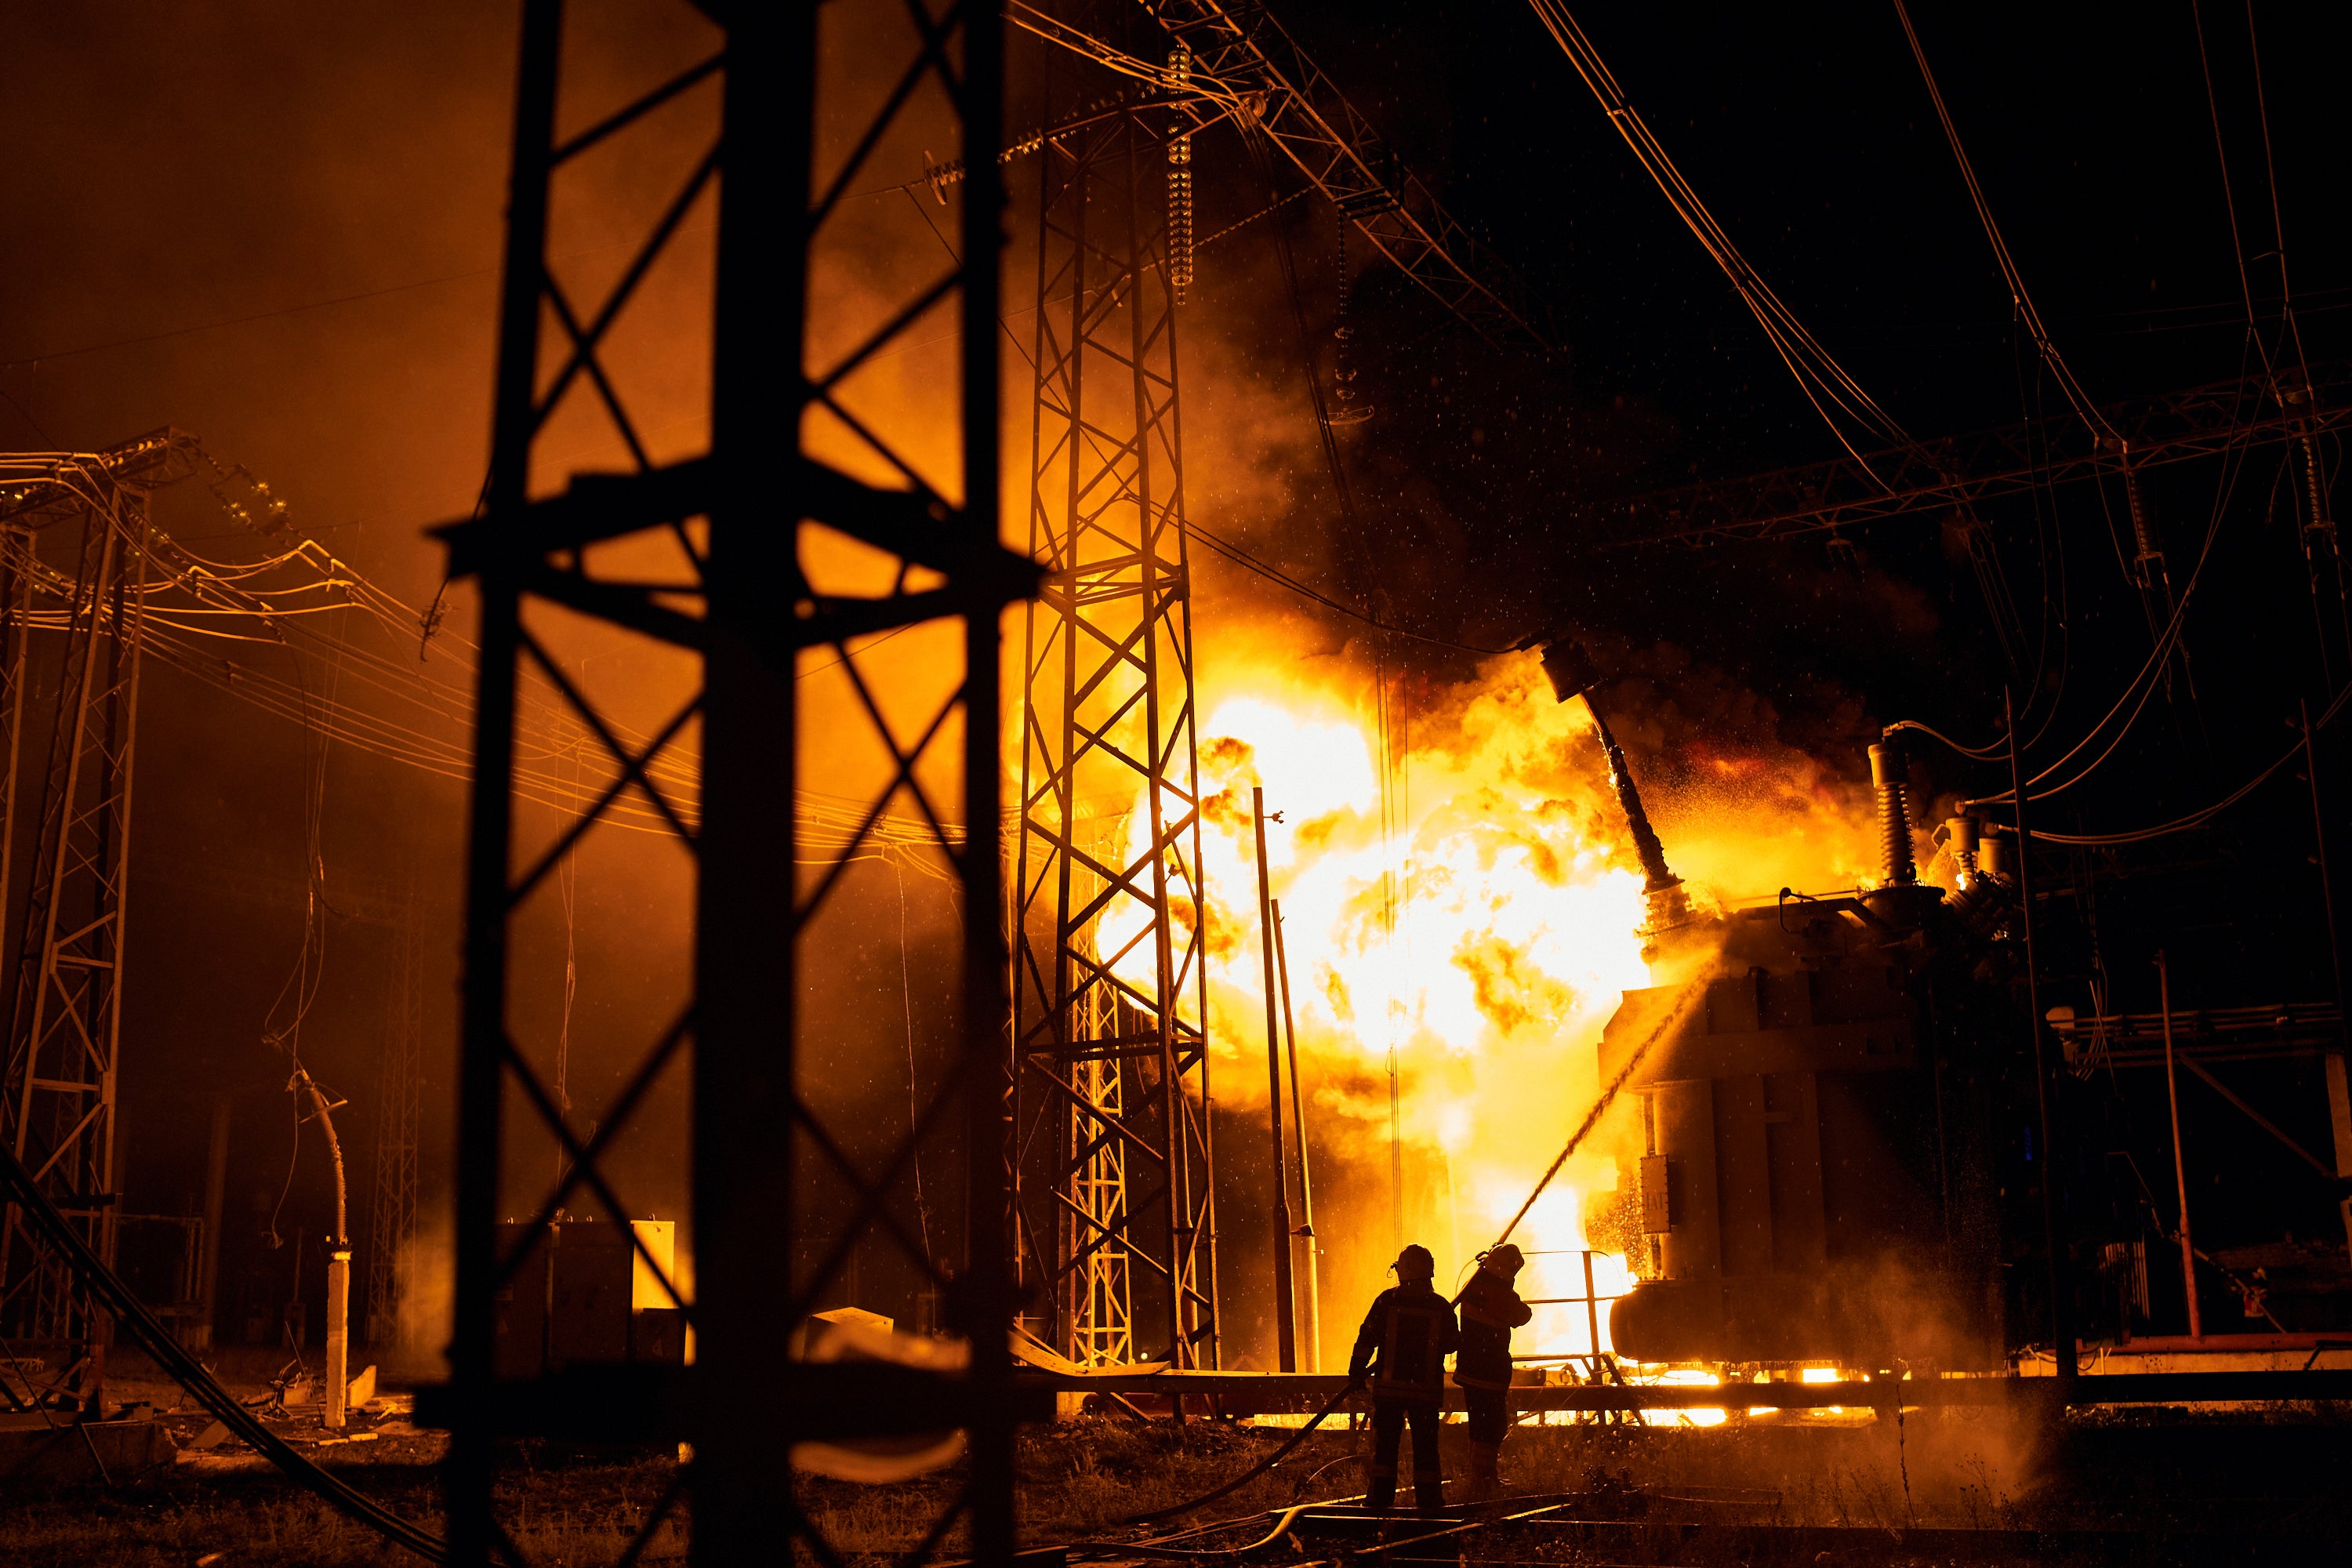 Firefighters put out the blaze after a Russian rocket attack hit an electric power station in Kharkiv, Ukraine (Kostiantyn Liberov/AP)